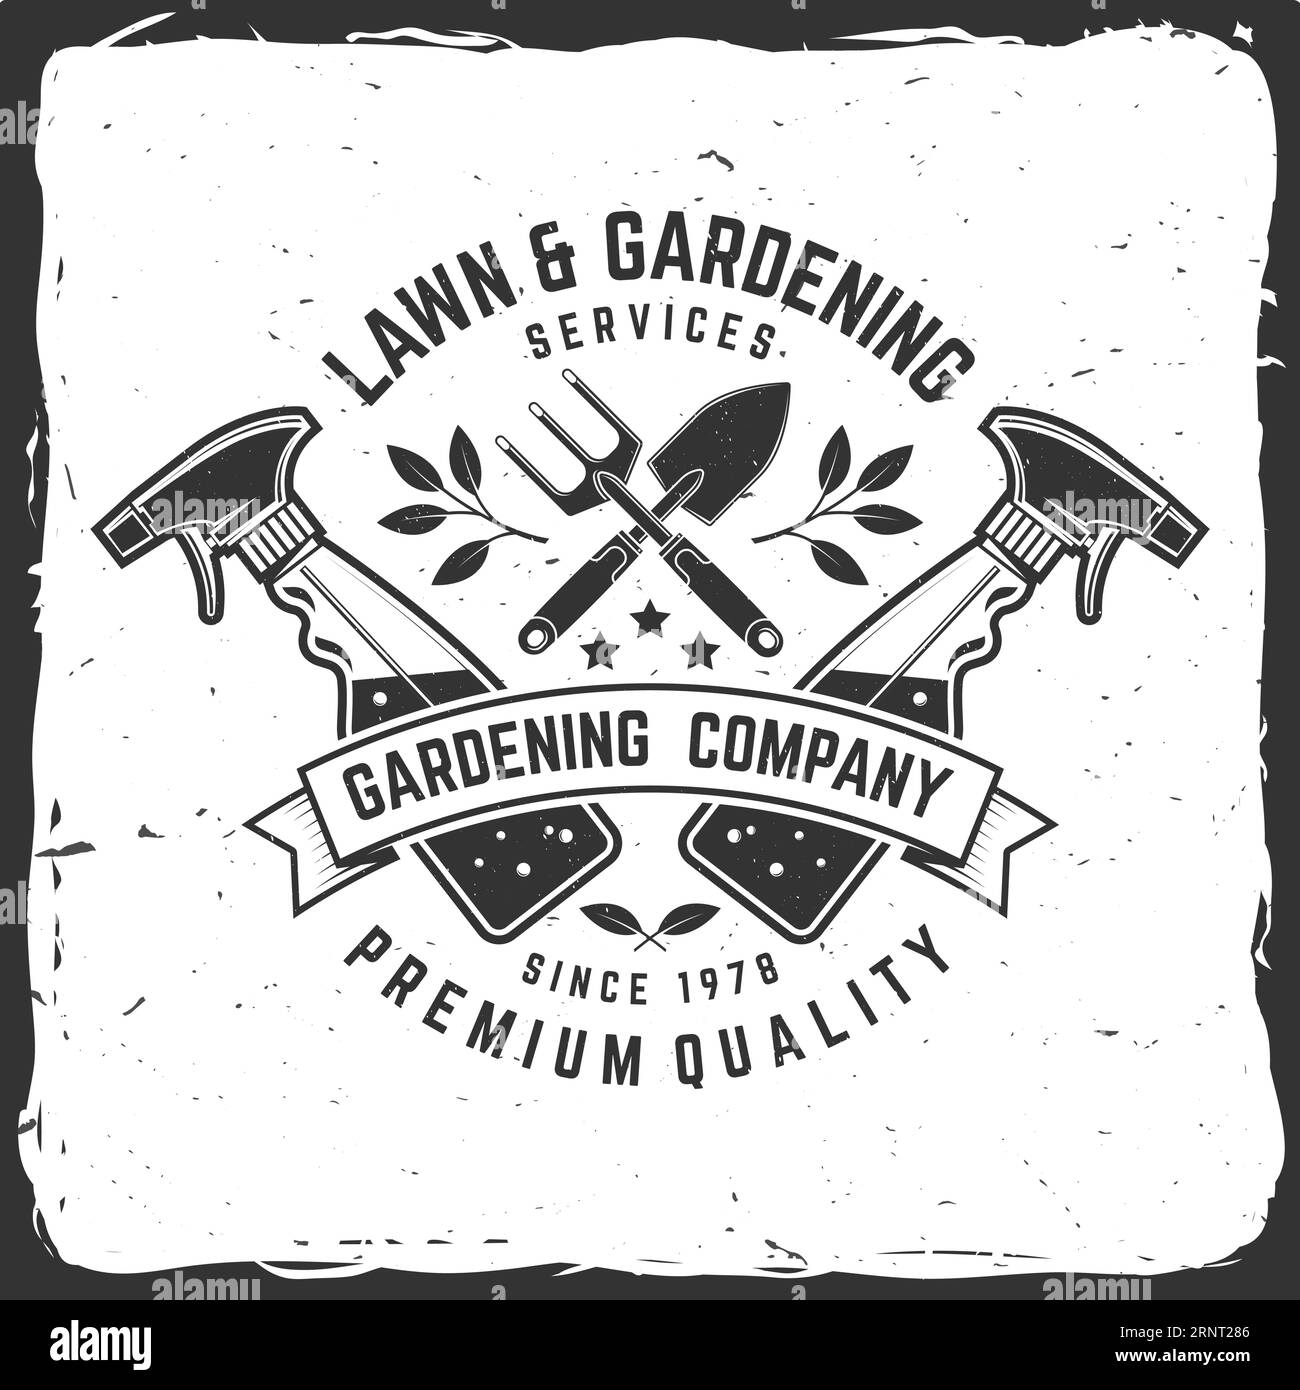 Lawn and Gardening services emblem, label, badge, logo. Vector illustration. For sign, patch, shirt design with hand garden trowel, farming fork Stock Vector